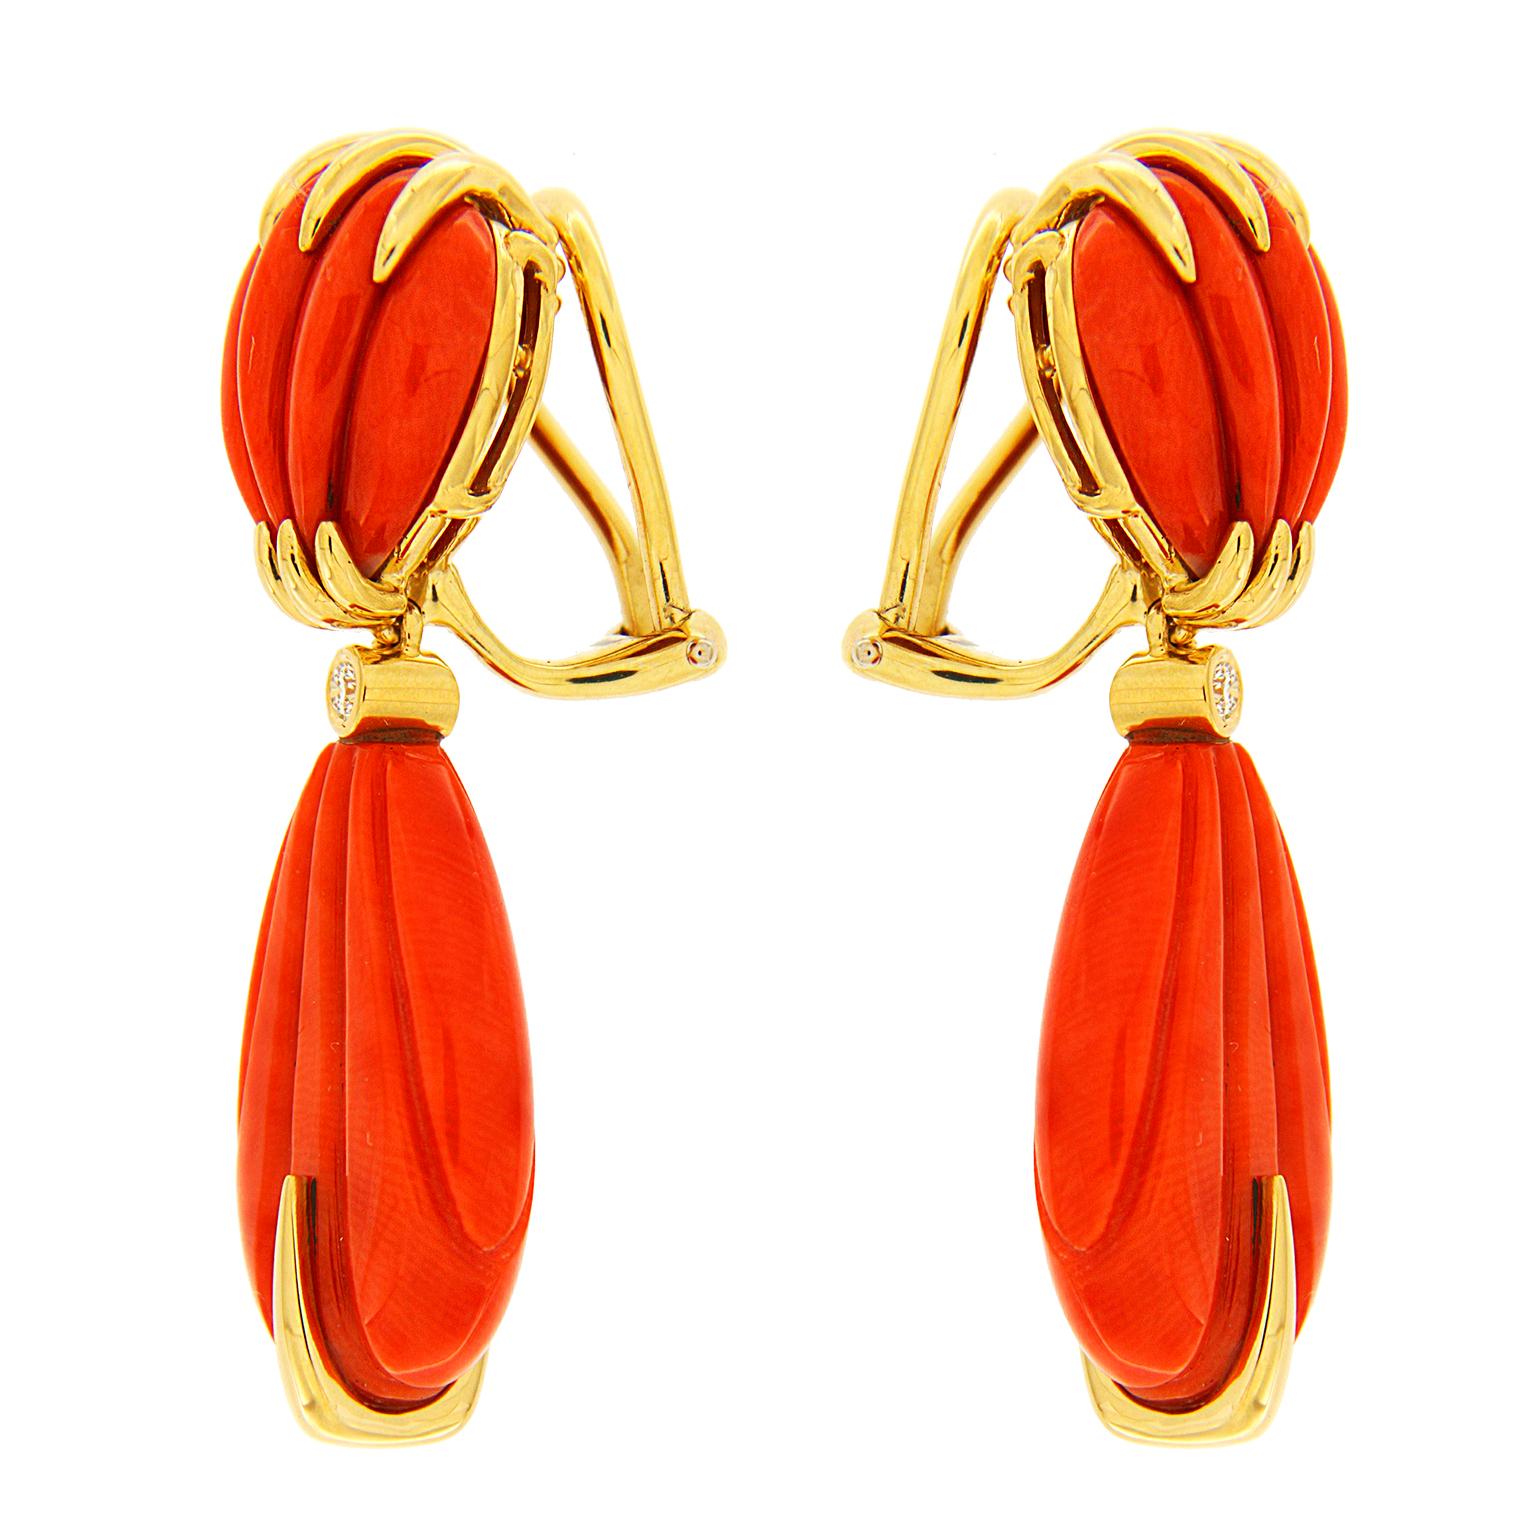 Valentin Magro Carved Red Coral Earrings with Gold Accent Wires are embellished with rounds and points. The featured jewel is coral, repurposed and carved into fluted shapes. The upper gems are rounded while the hanging pieces are drops. Round